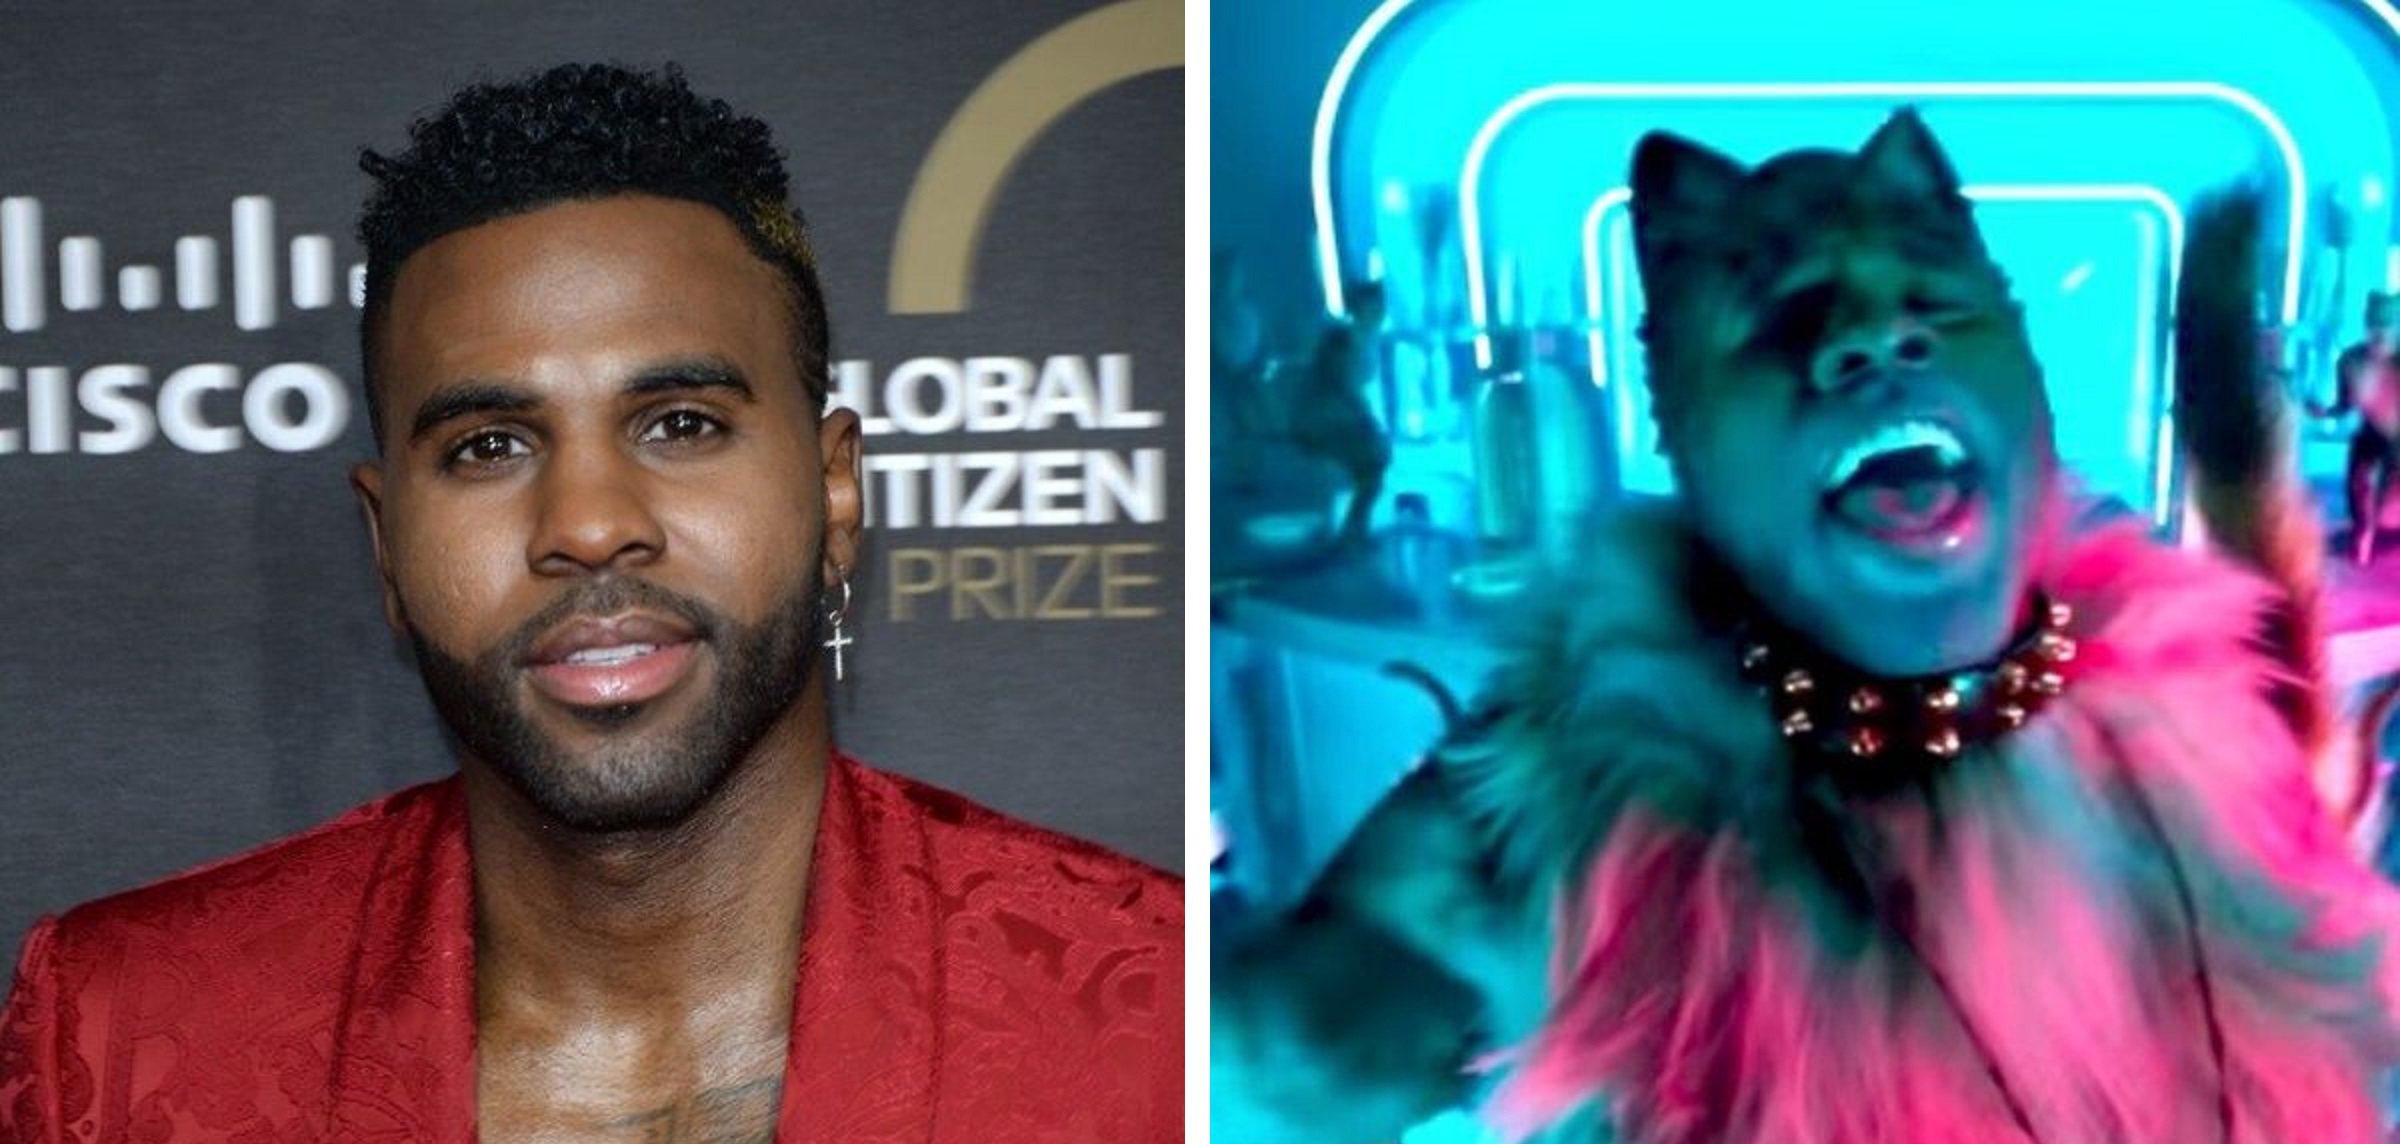 Jason Derulo On His Cats Role: “I thought it was gonna change the world”